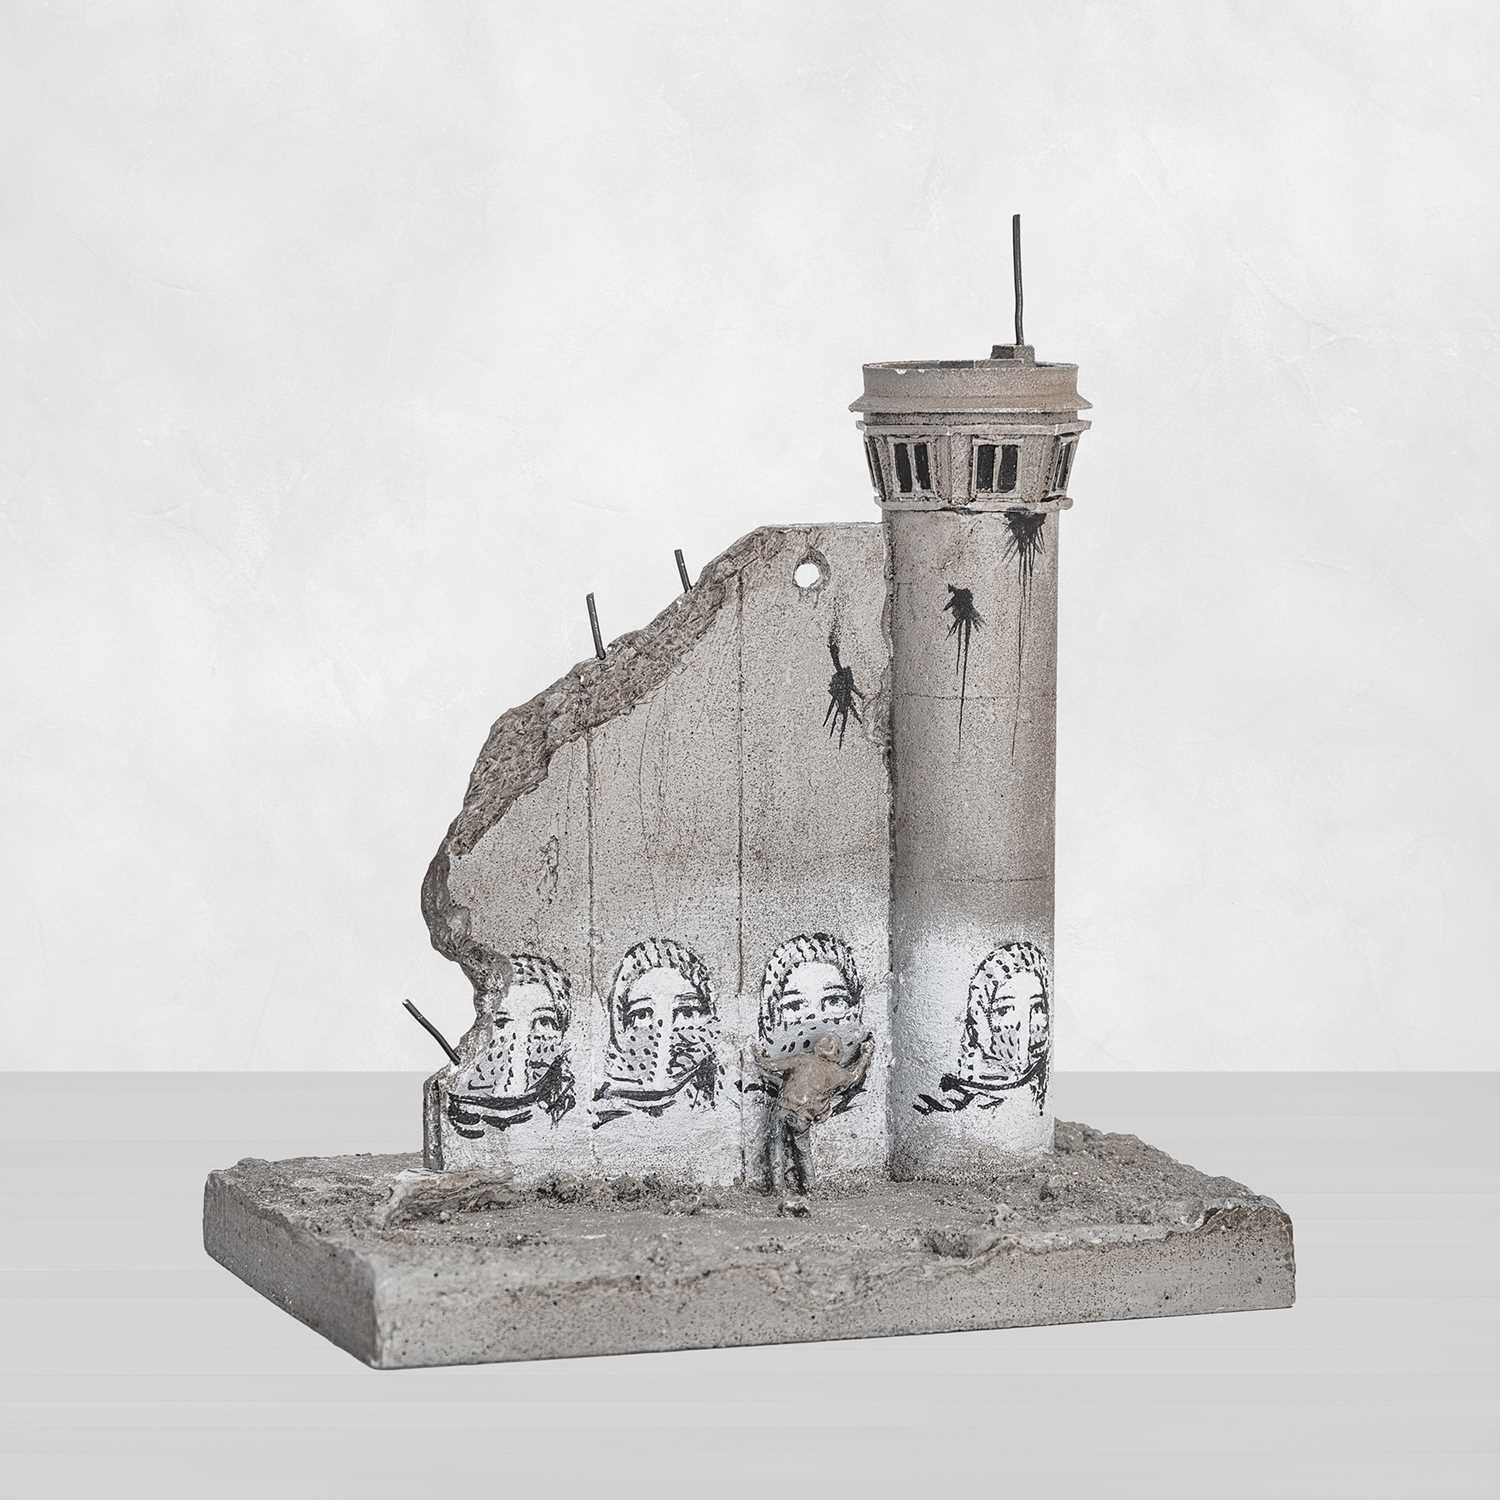 Lot 99 - Banksy (British 1974-), Walled Off Hotel - Four-Part Souvenir Wall Section With Watch Tower